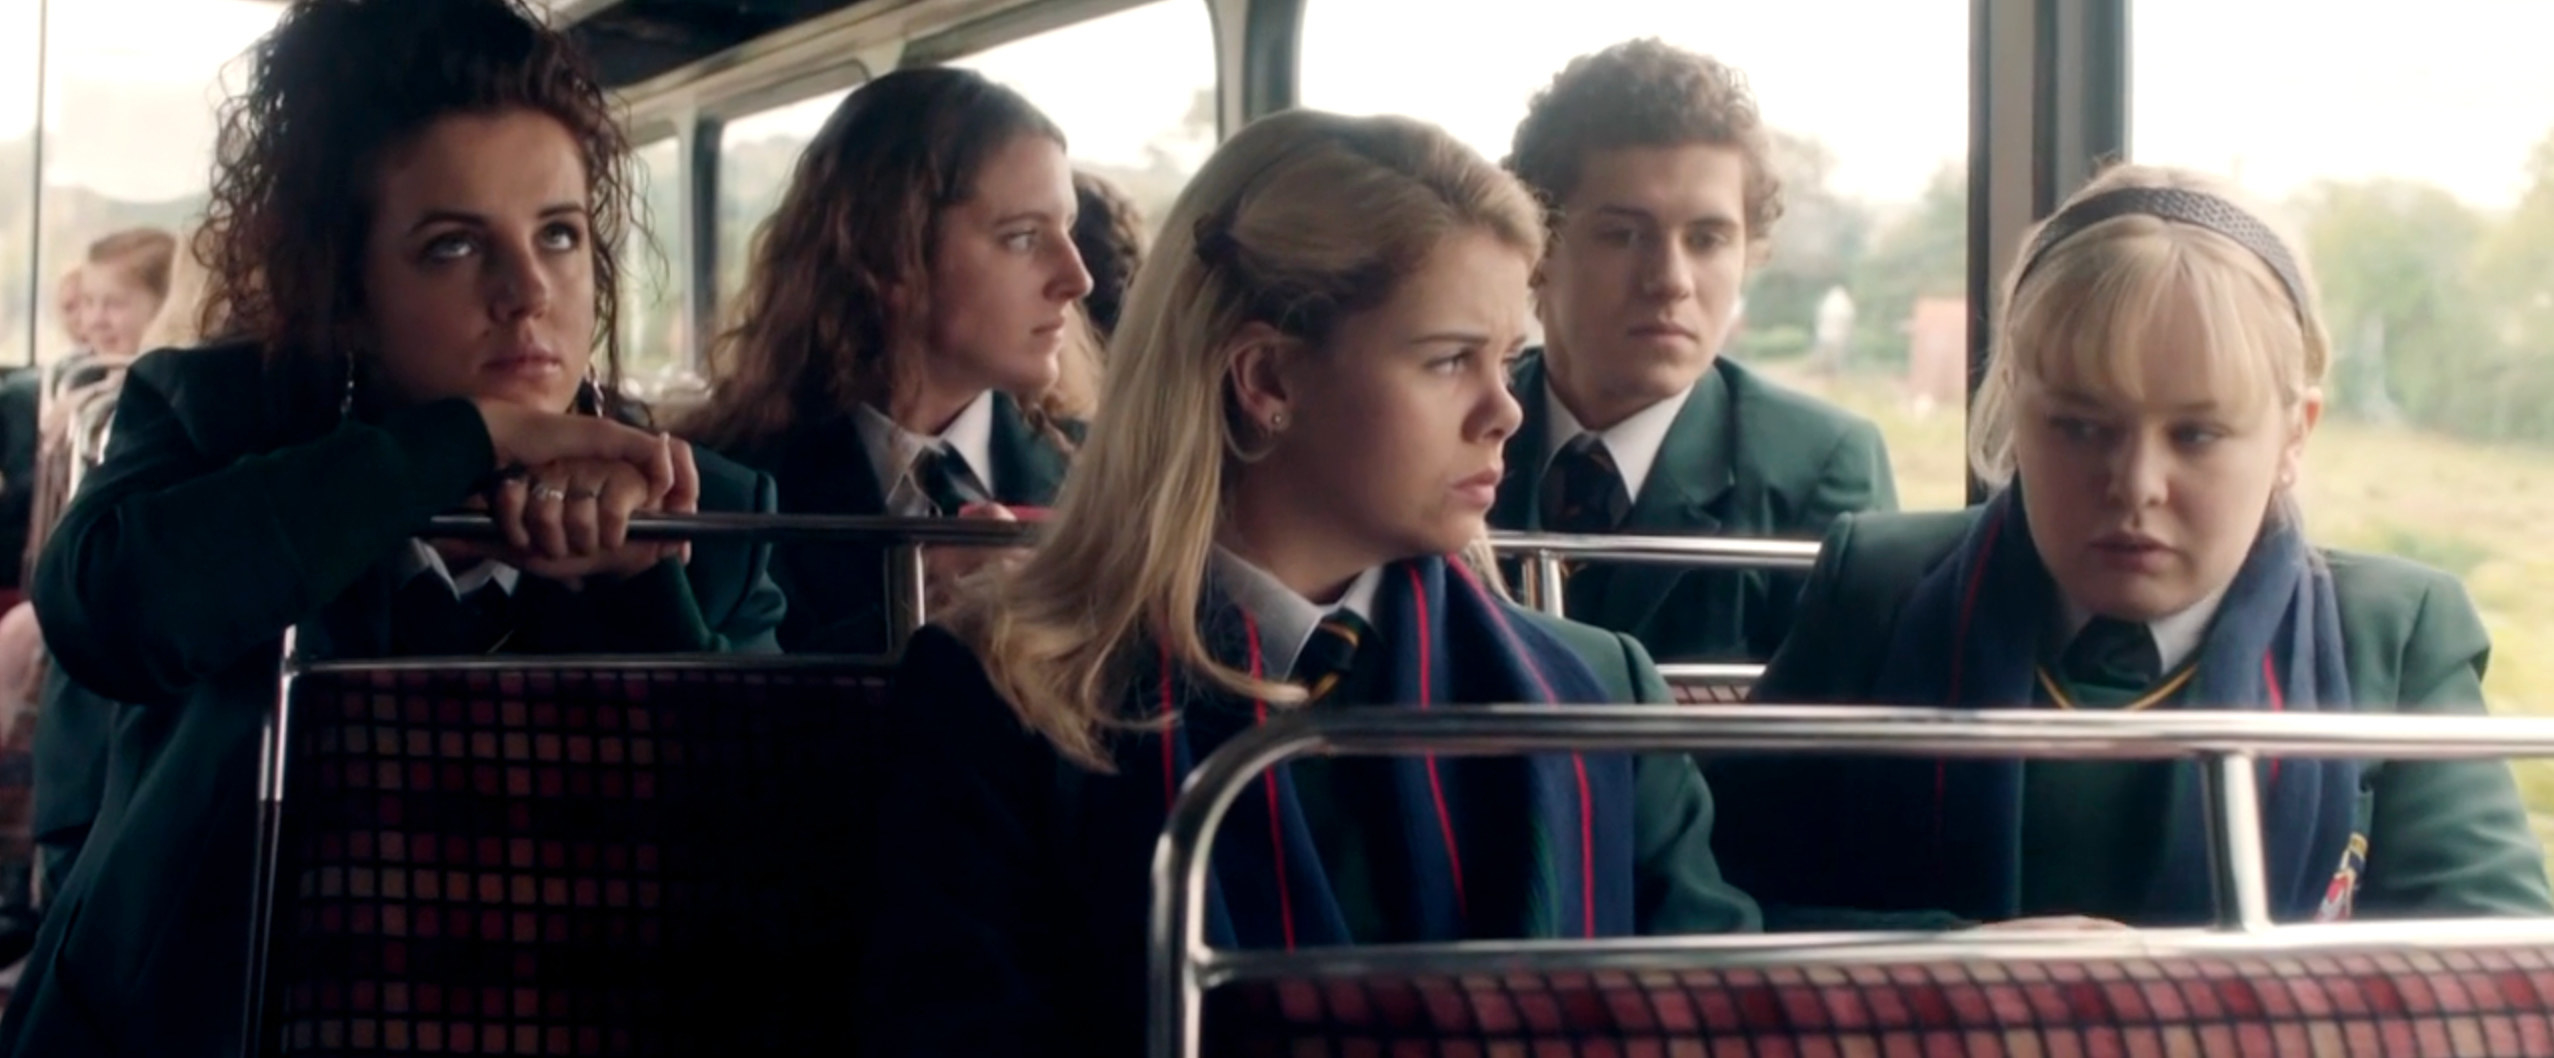 In a screenshot from the pilot, the show&#x27;s central five characters are on a bus to school, all in school uniform. From left to right sit Michelle, Orla, Erin, James and Clare.